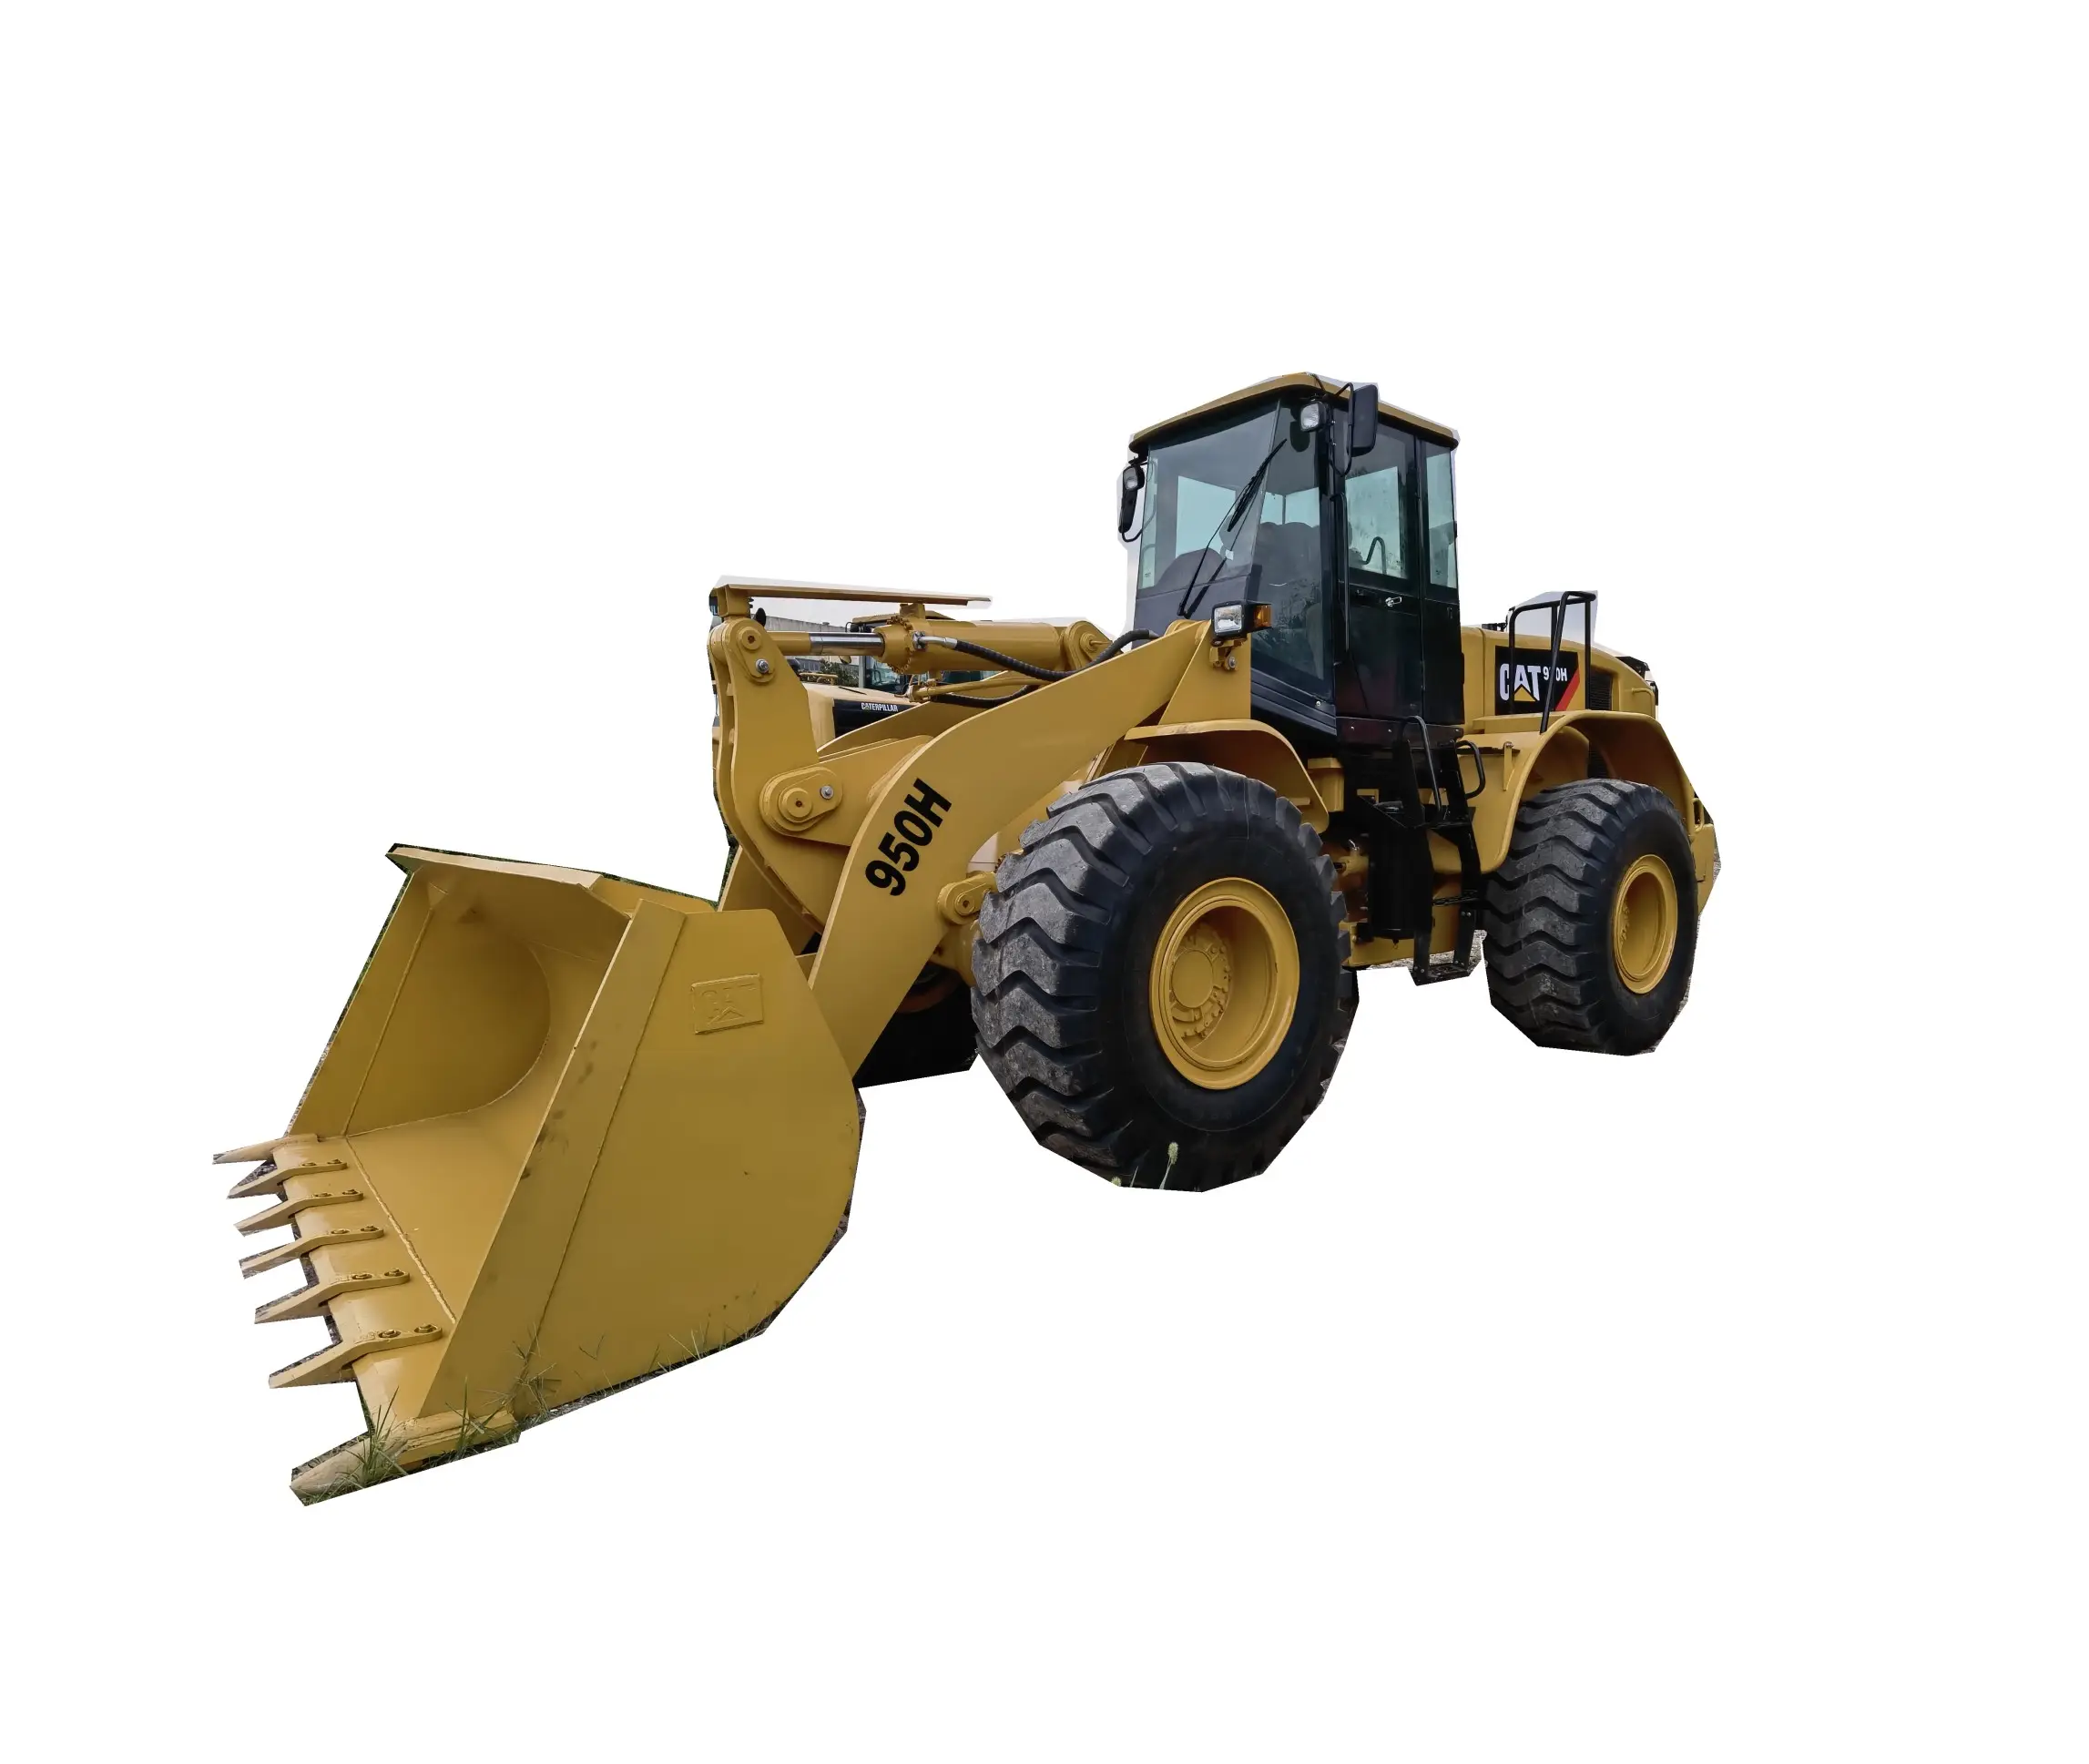 Original painted Japan Made Used CAT 966H Wheel Loader Second Hand Cater pillar 950H 950GC on Selling for Factory price